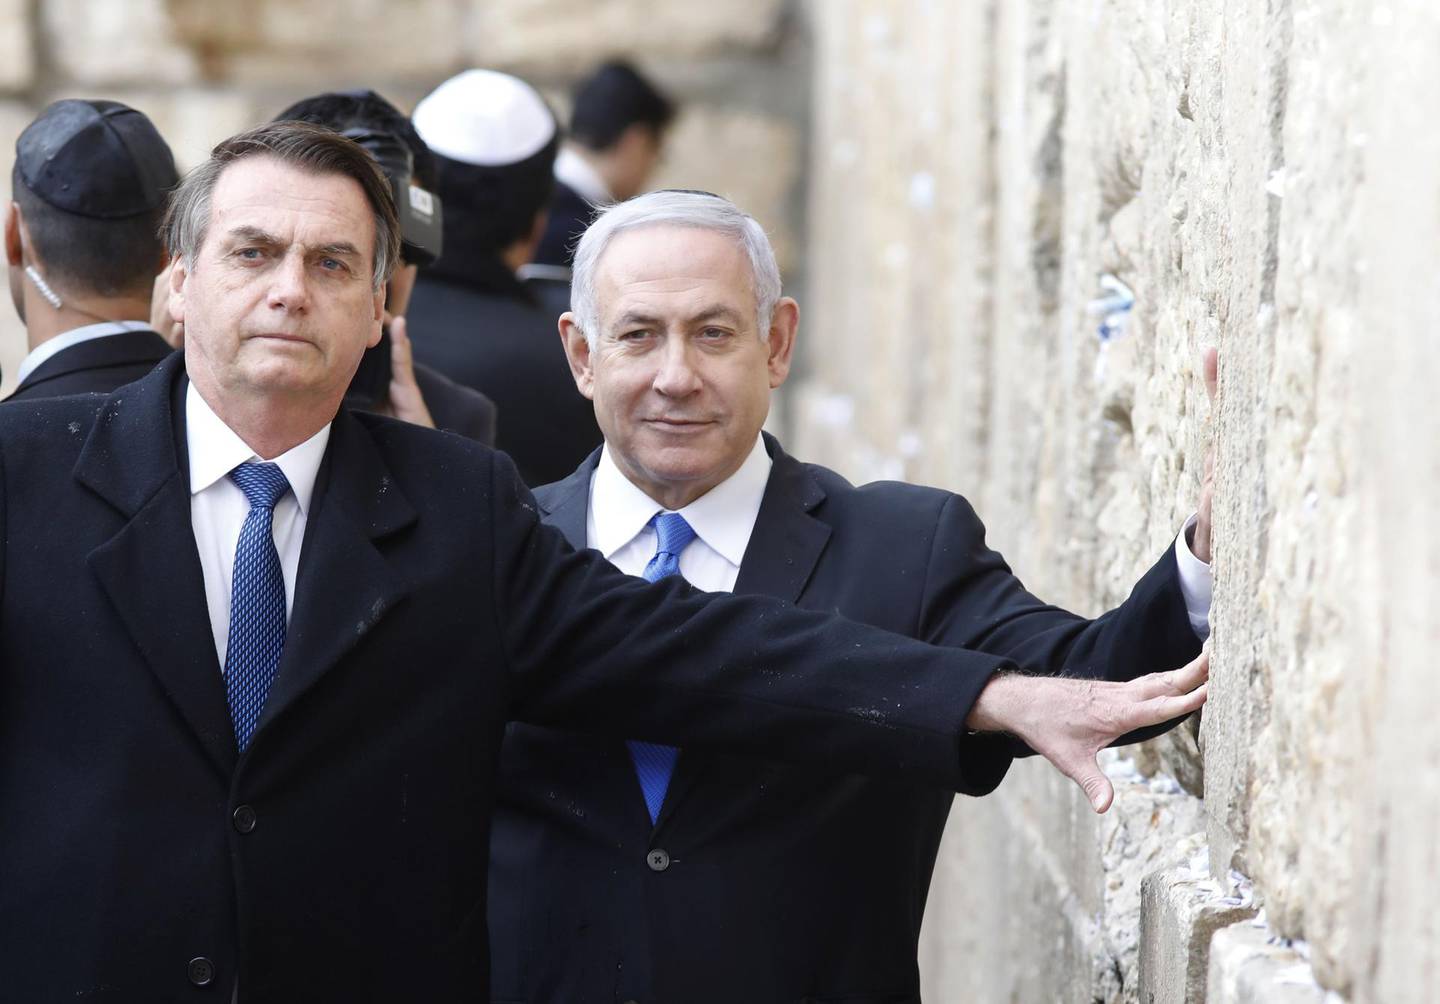 TOPSHOT - Brazilian President Jair Bolsonaro (L) and Israeli Prime Minister Benjamin Netanyahu touch the Western wall, the holiest site where Jews can pray, in the Old City of  Jerusalem on April 1, 2019. Bolsonaro arrived in Israel just ahead of the country's polls in which his ally Prime Minister Benjamin Netanyahu faces a tough re-election fight. / AFP / POOL / Menahem KAHANA
